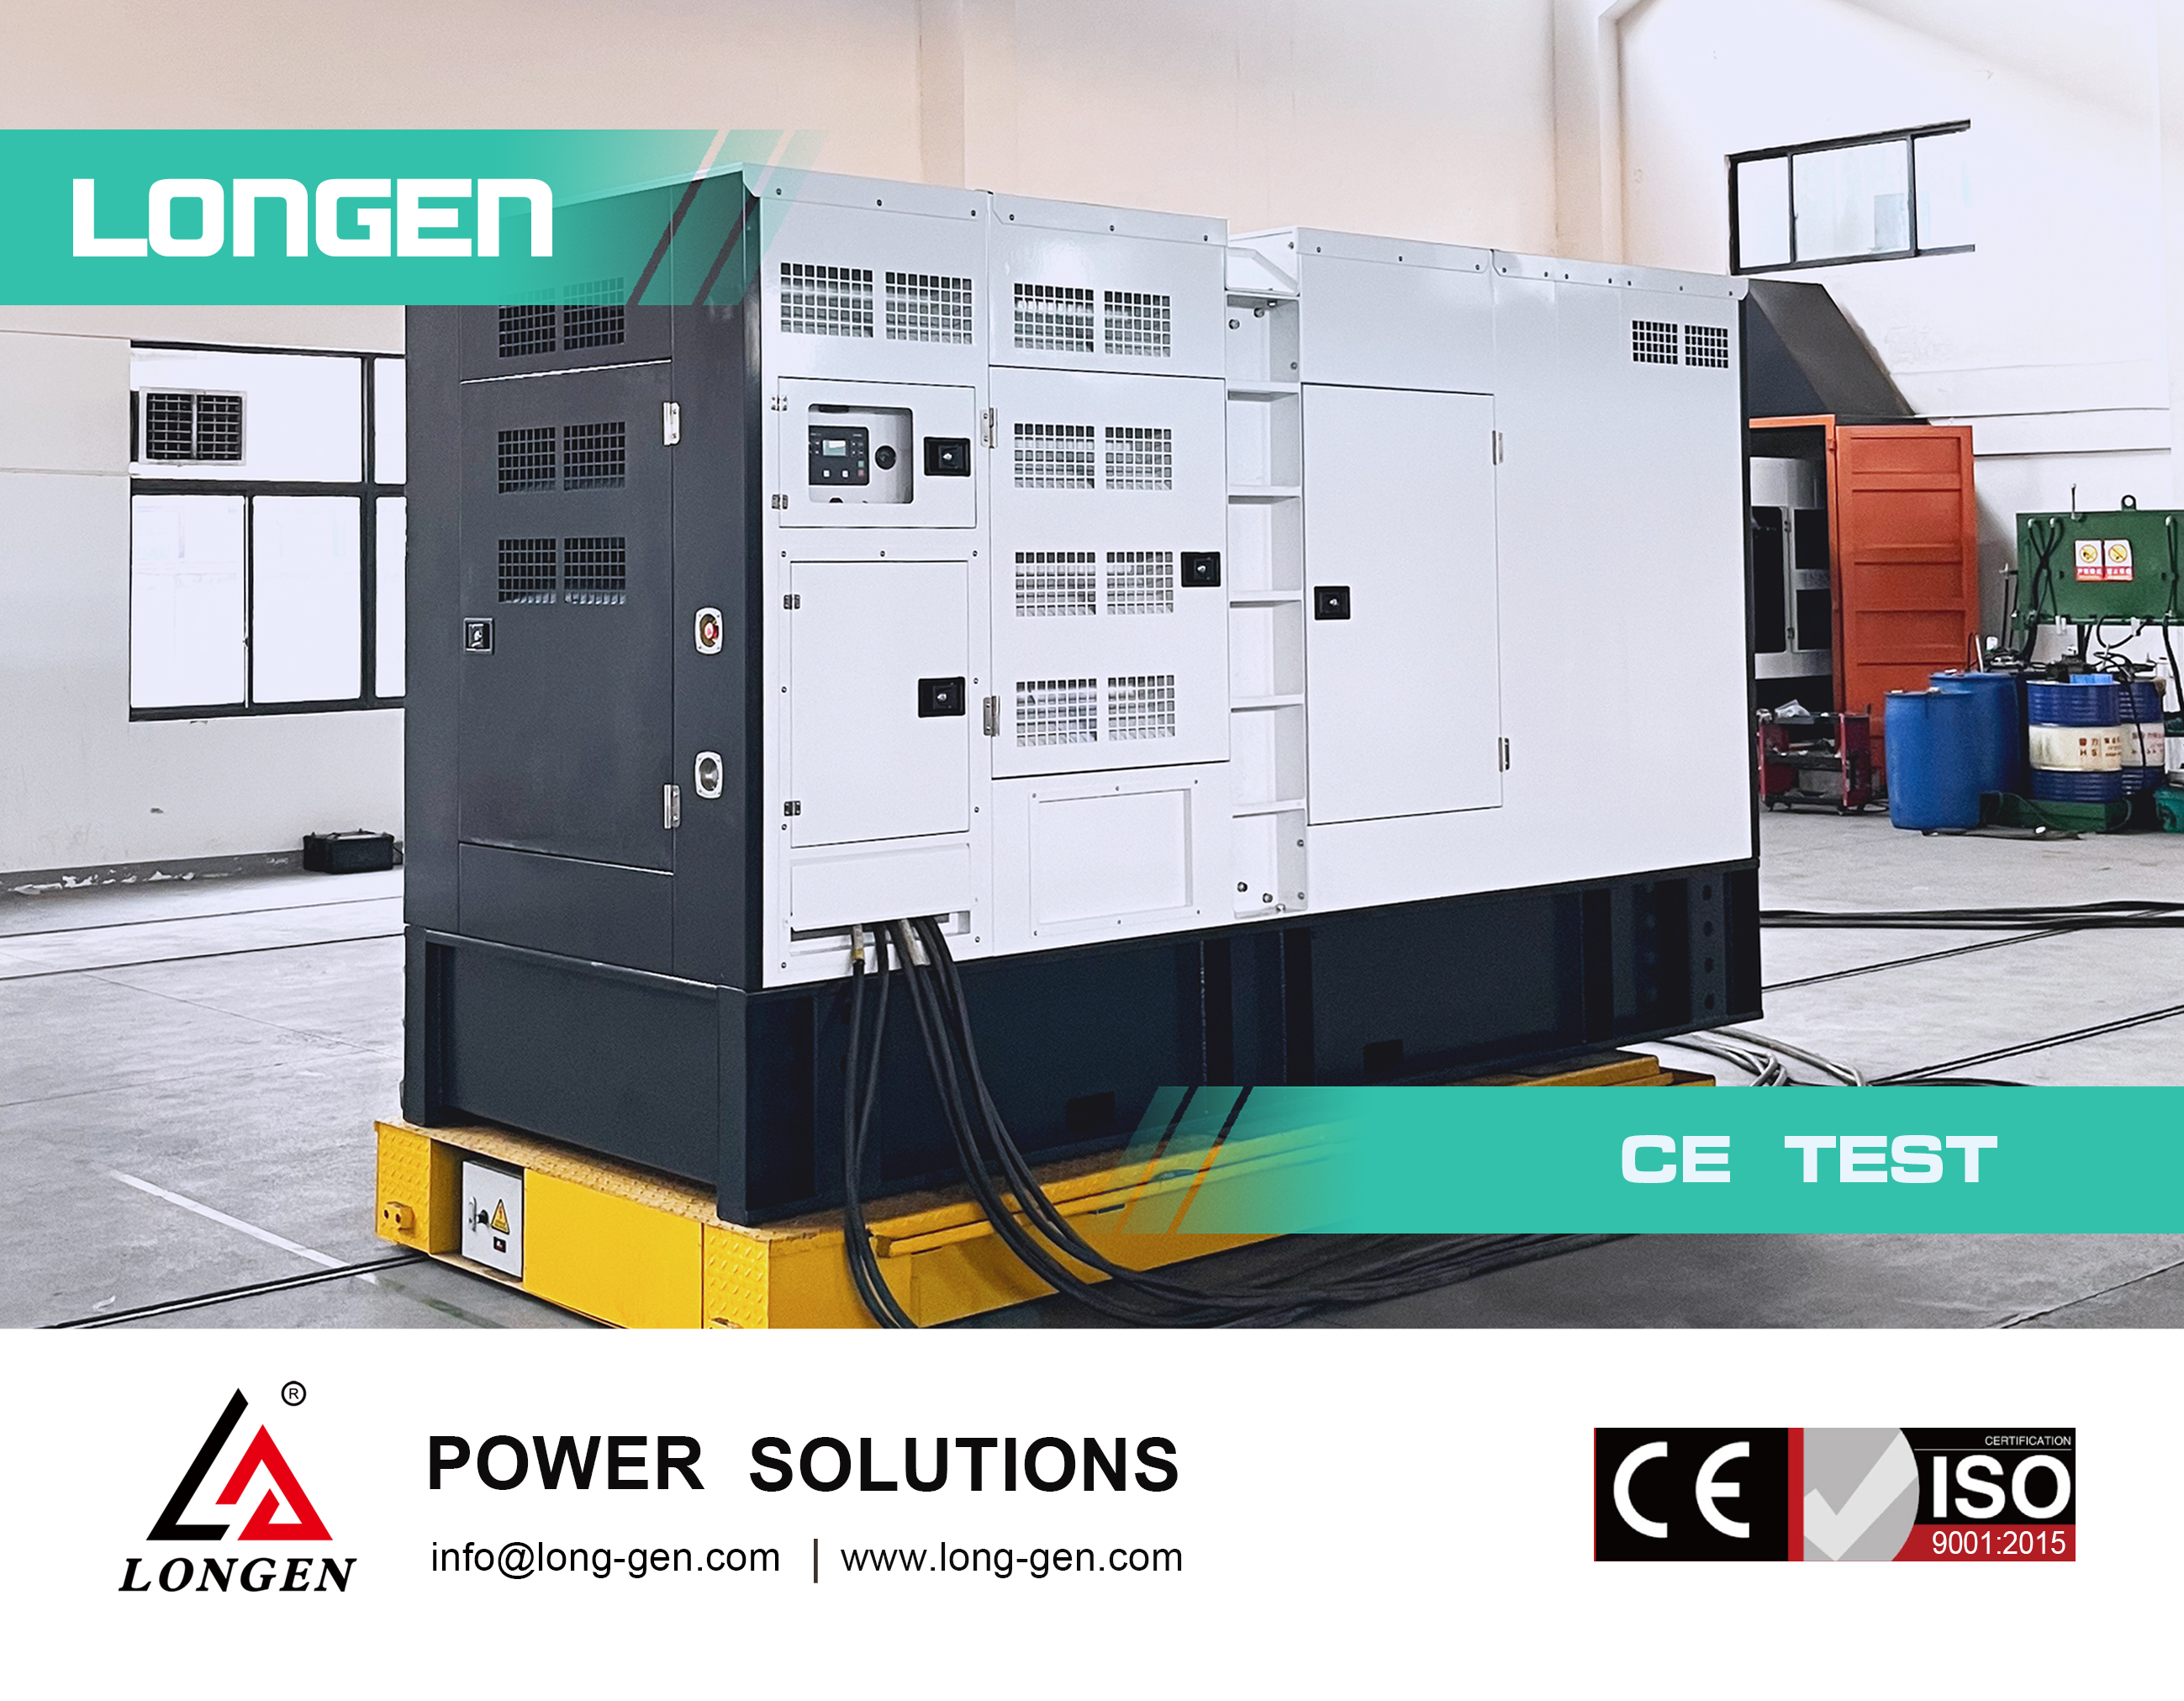 SGS Is Conducting CE Testing for Generator Sets of LONGEN POWER